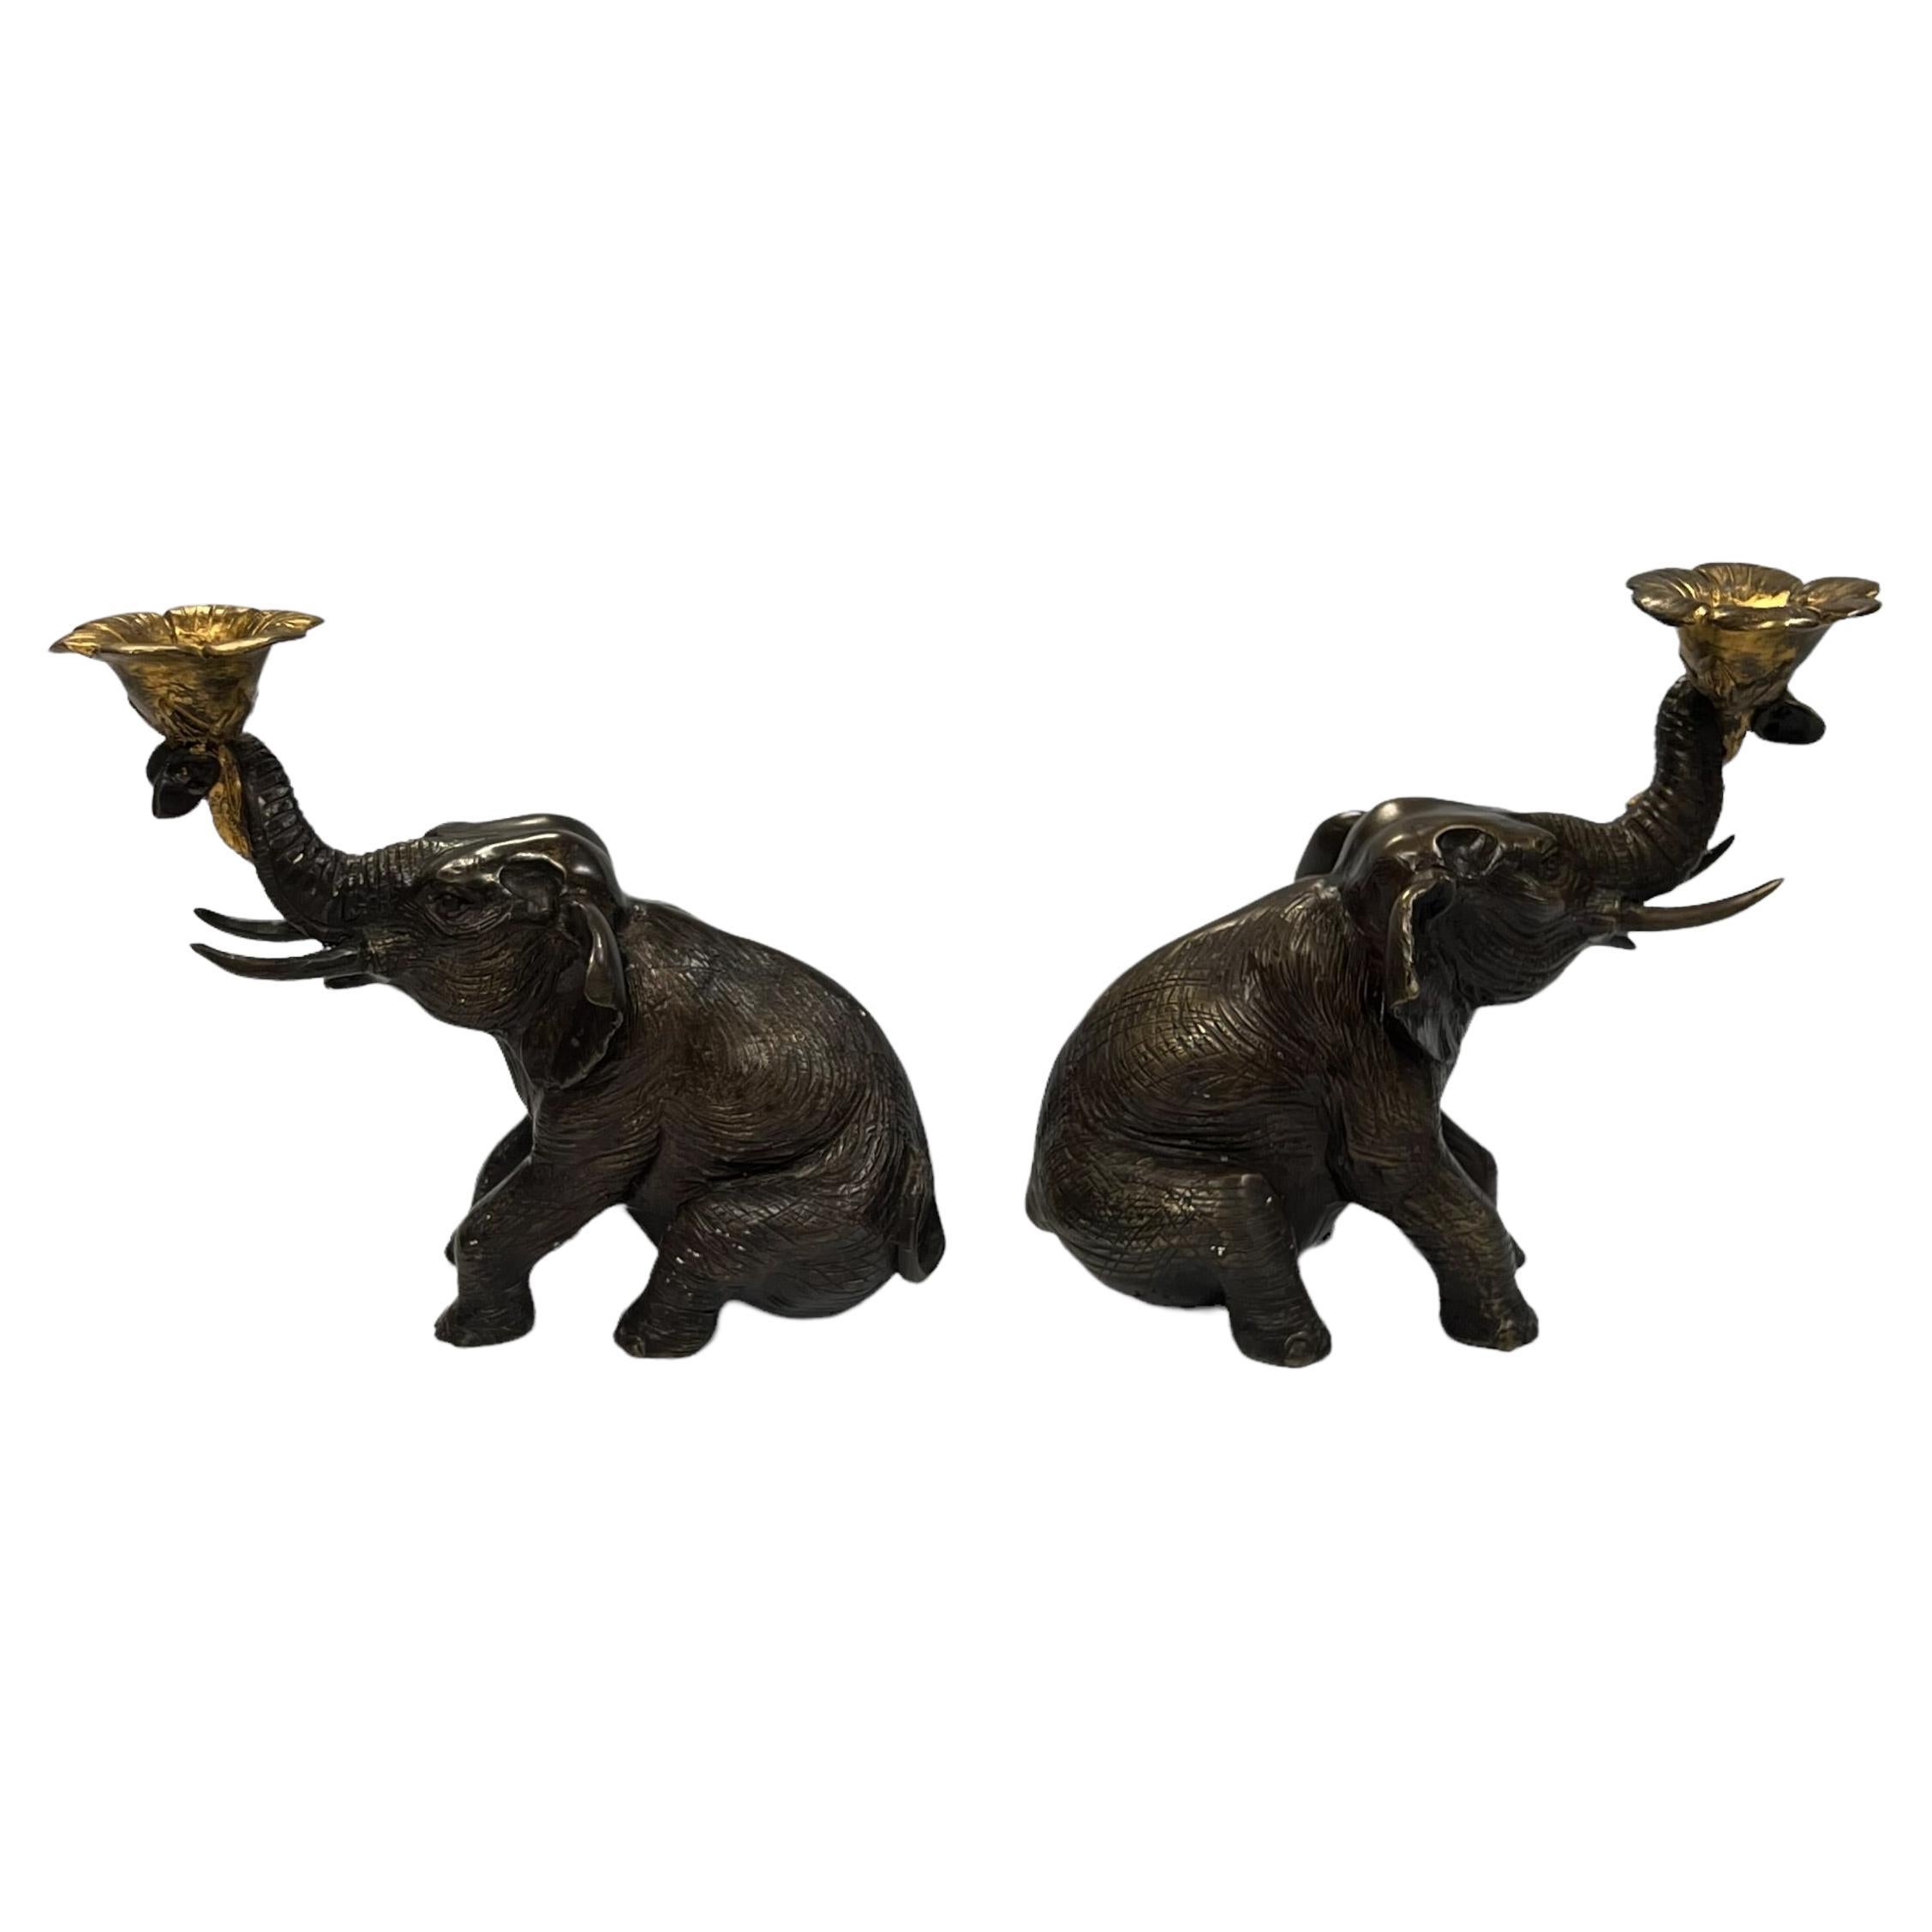 Vintage Gilt and Patinated Bronze Elephant Form Candleholders